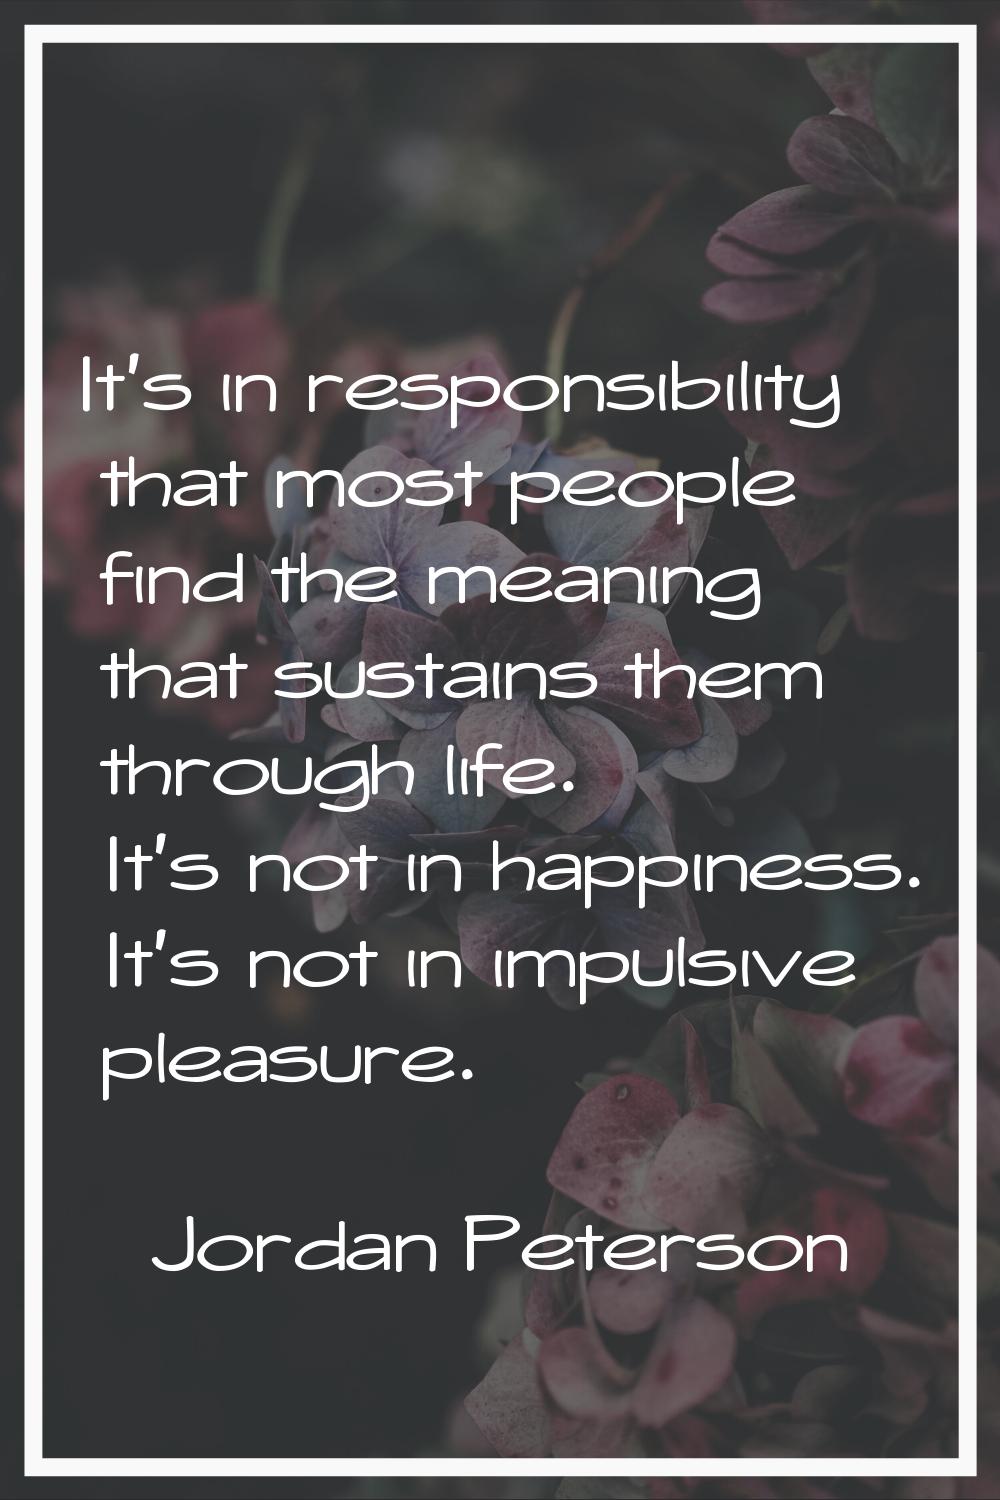 It's in responsibility that most people find the meaning that sustains them through life. It's not 